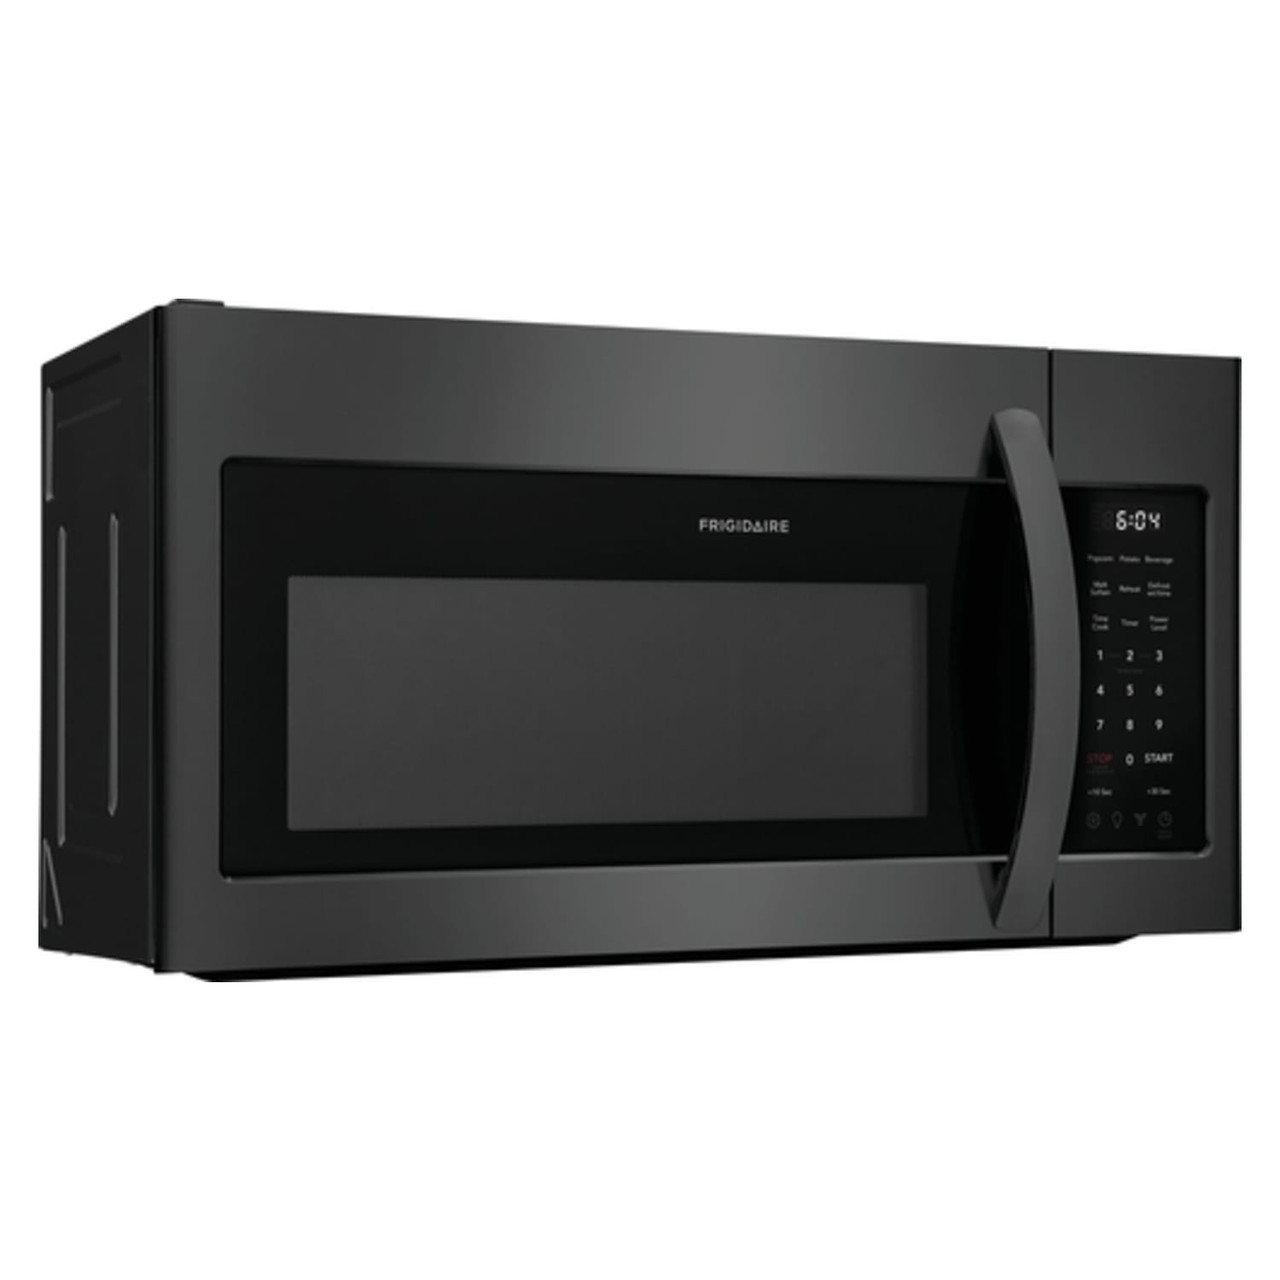 Frigidaire 1.8 cu. ft. Over the Range Microwave in Stainless Steel